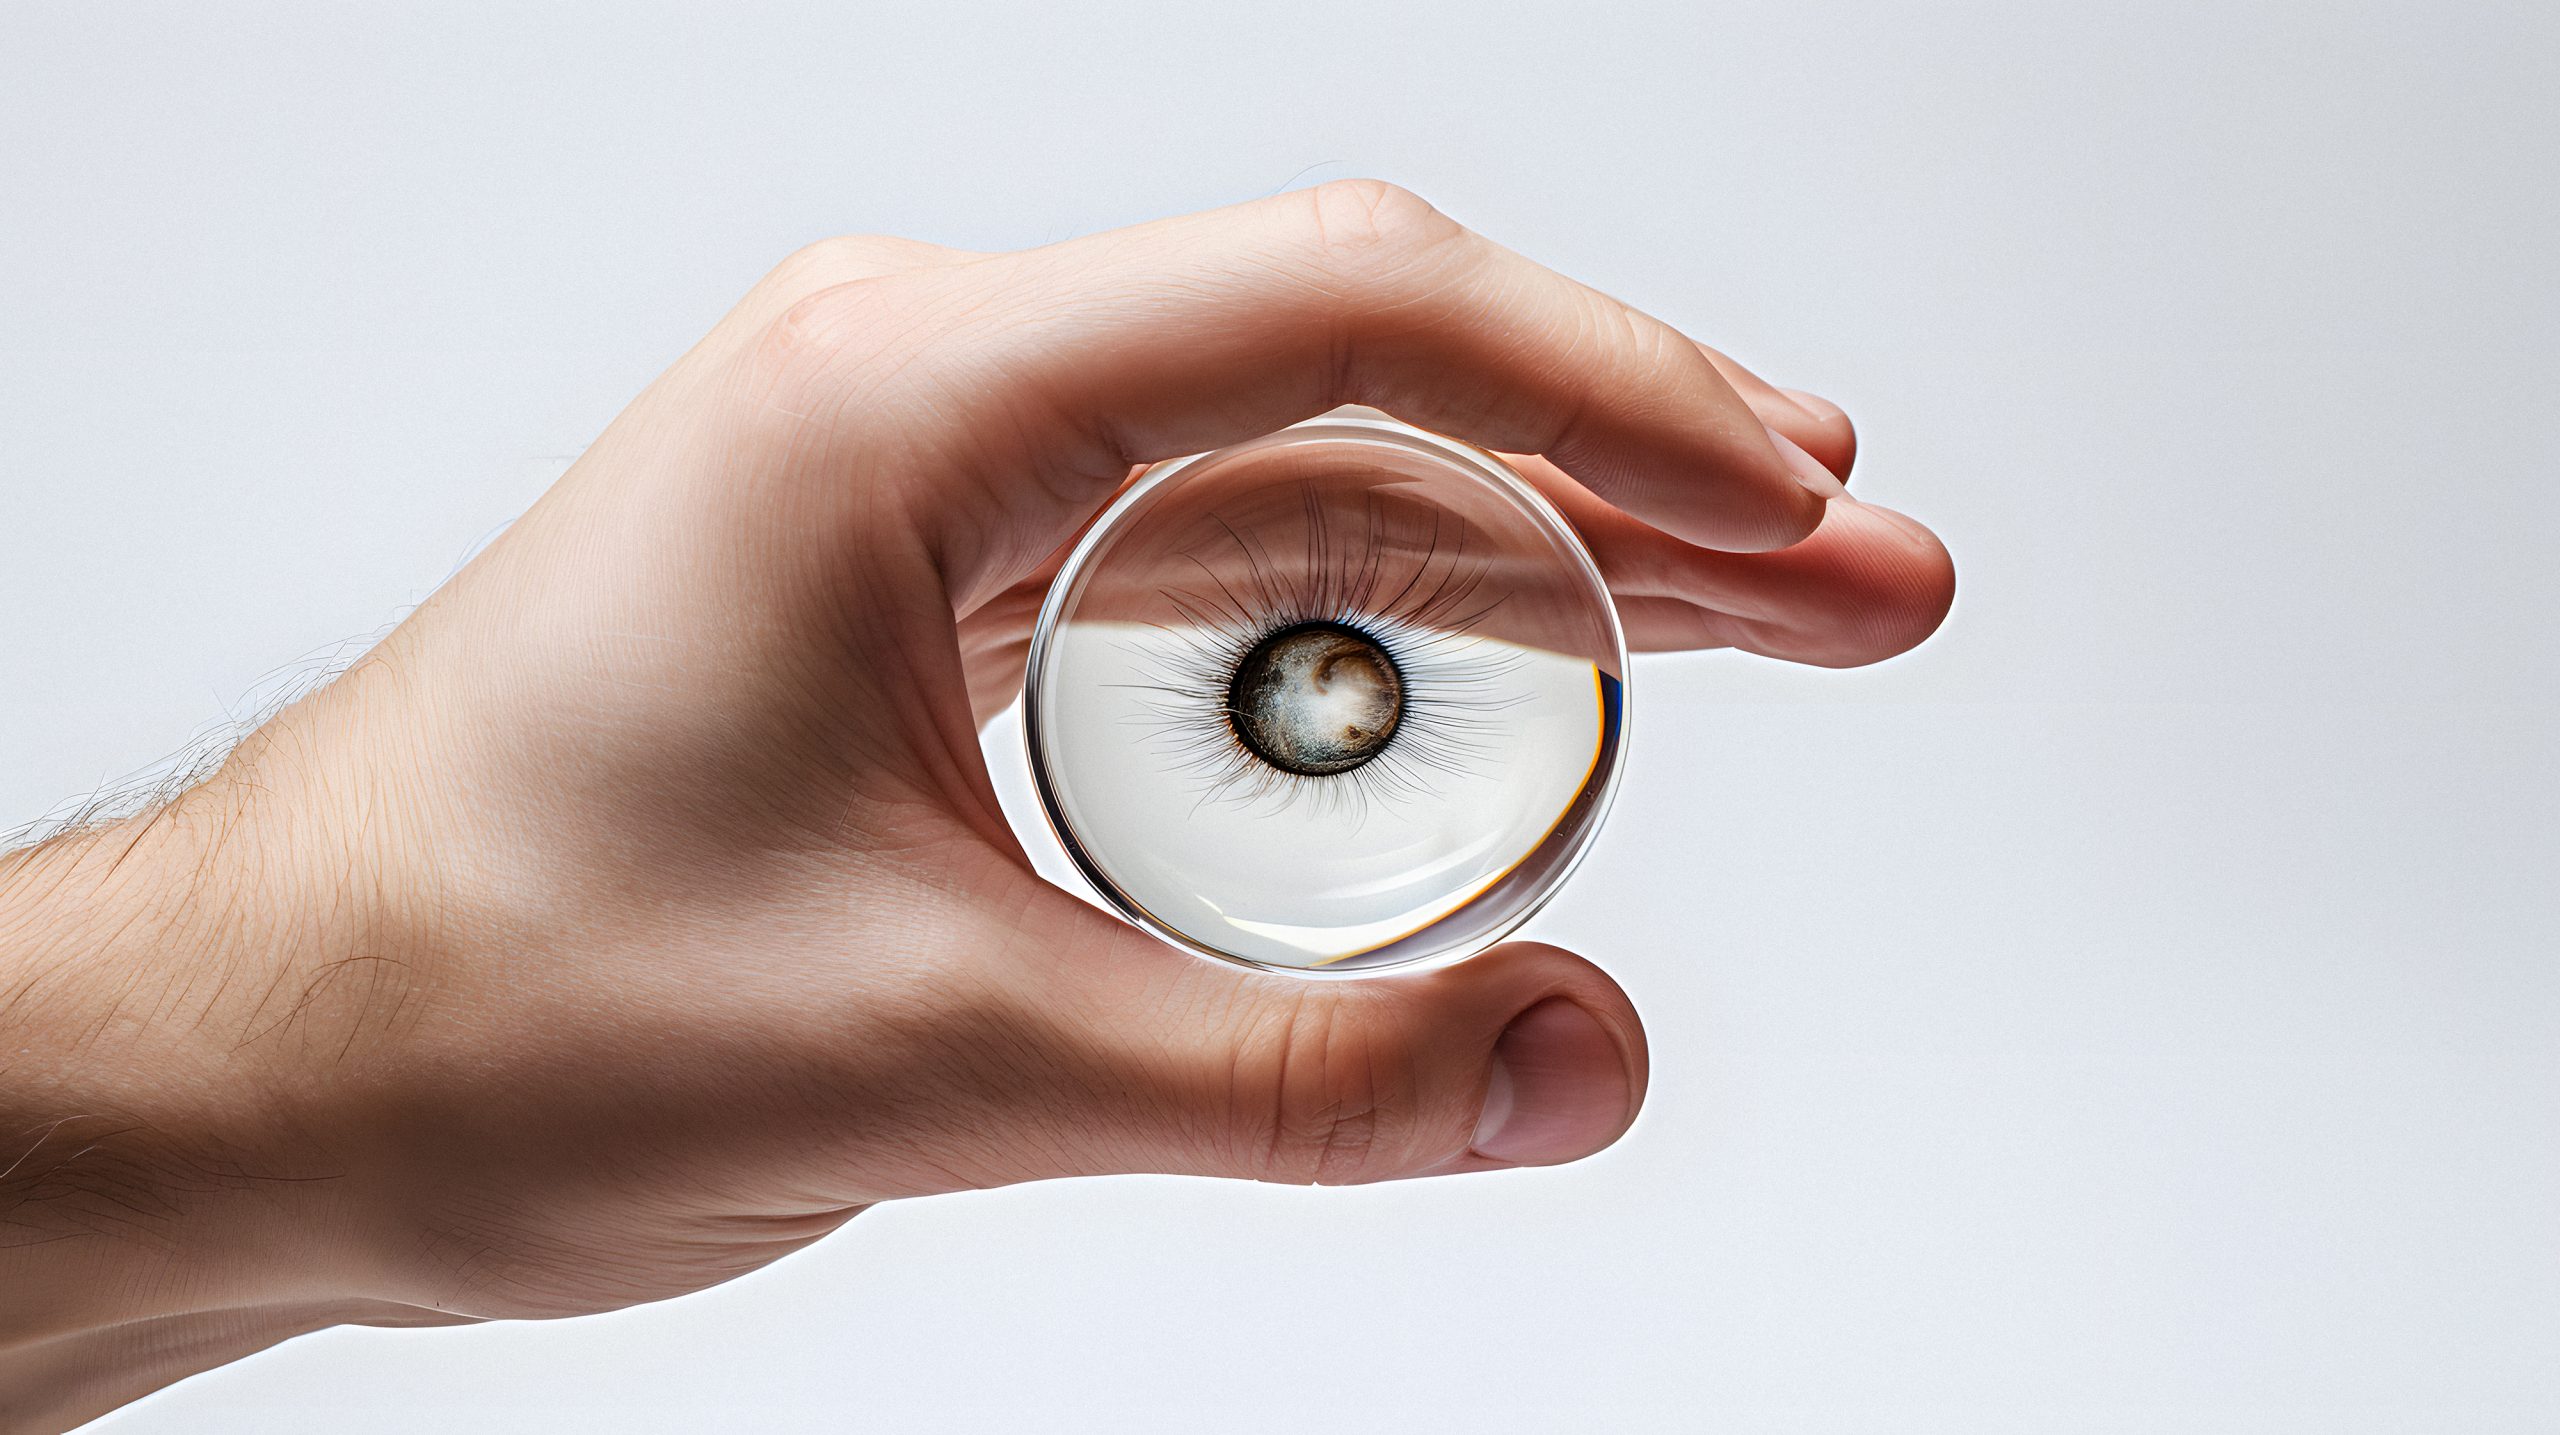 How To Take Care Of Contact Lenses